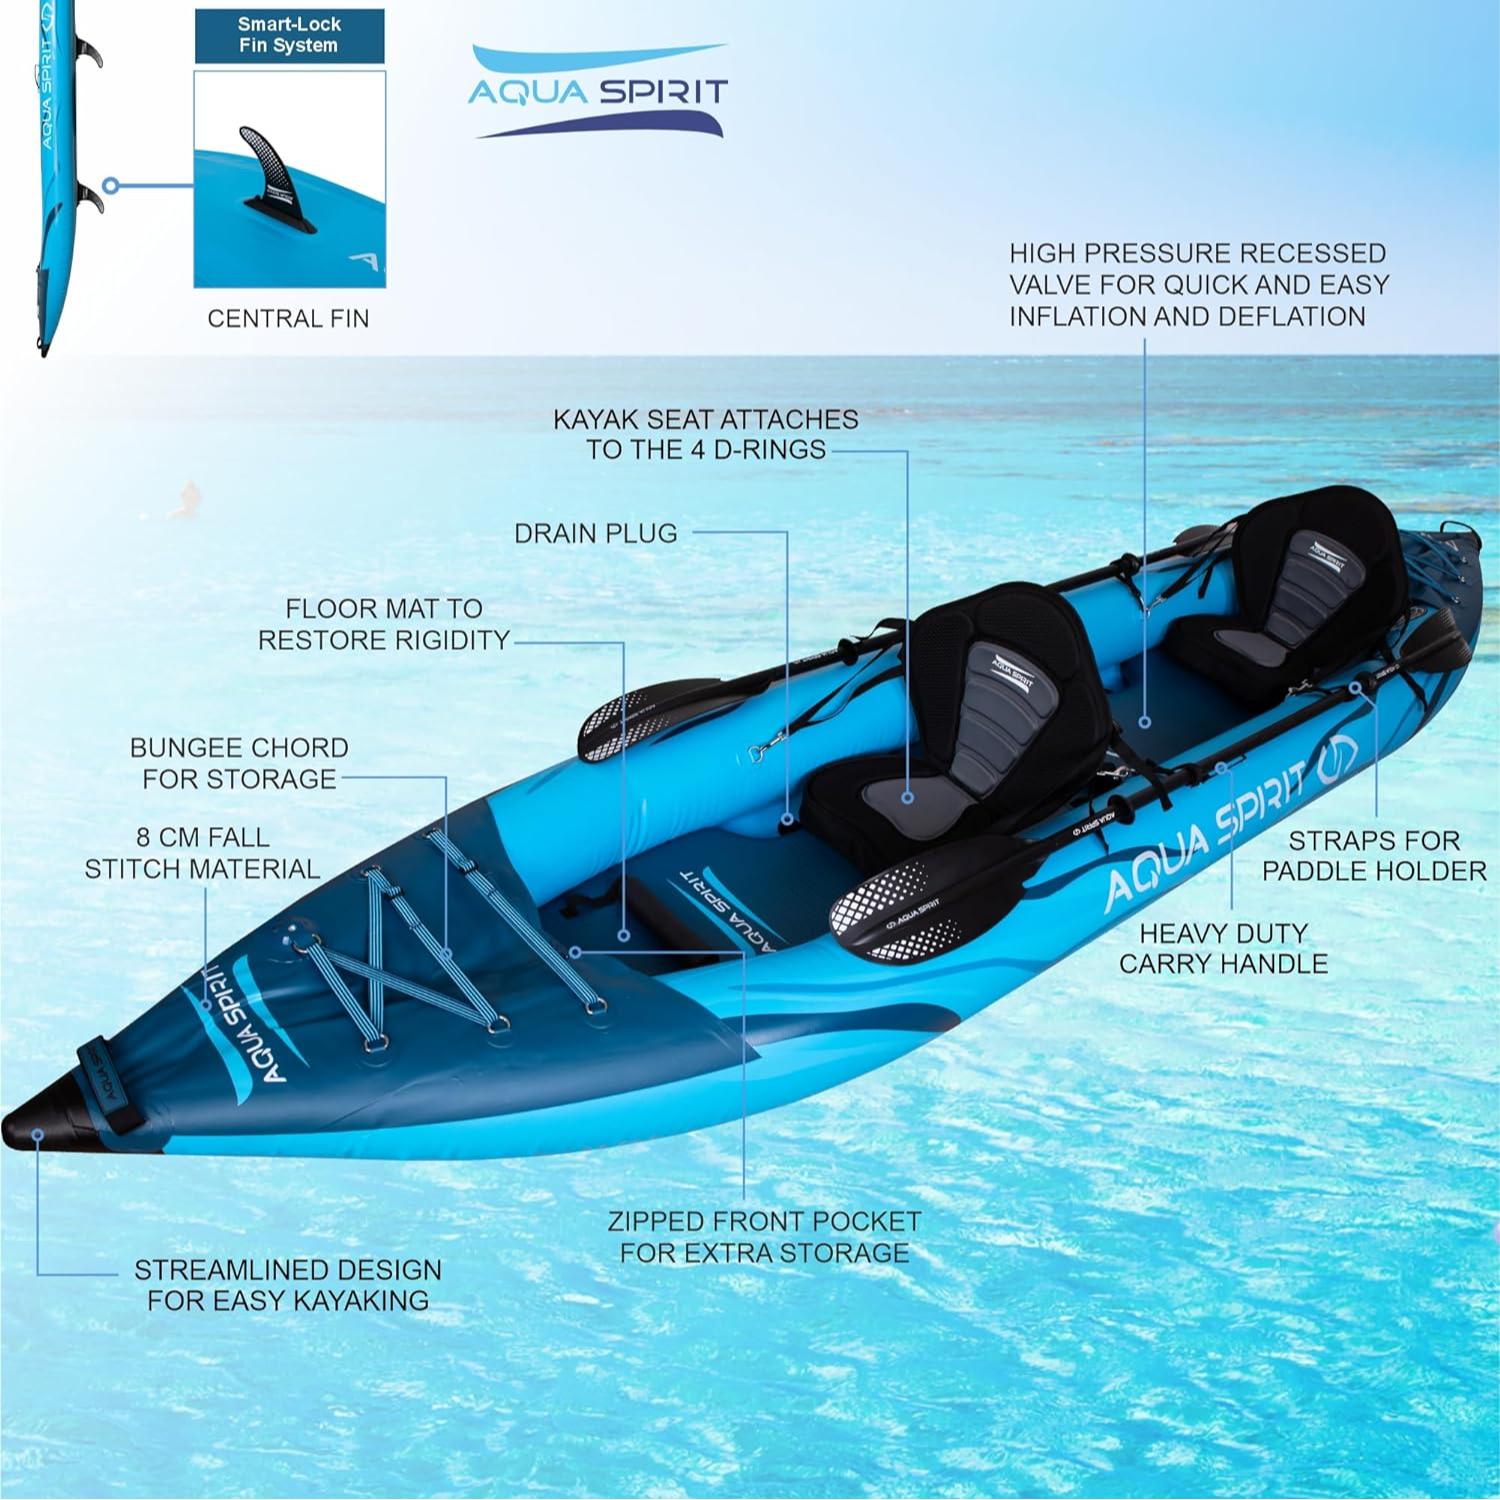 Aqua Spirit Inflatable Kayak, 2-Seater/1-Seater Complete Kayak Kit with Paddle, Backpack, Double-Action Pump and more accessories/Adult Beginners/Experts, 13’5”/10'5” - 3 Year Warranty - Aqua Spirit iSUPs UK